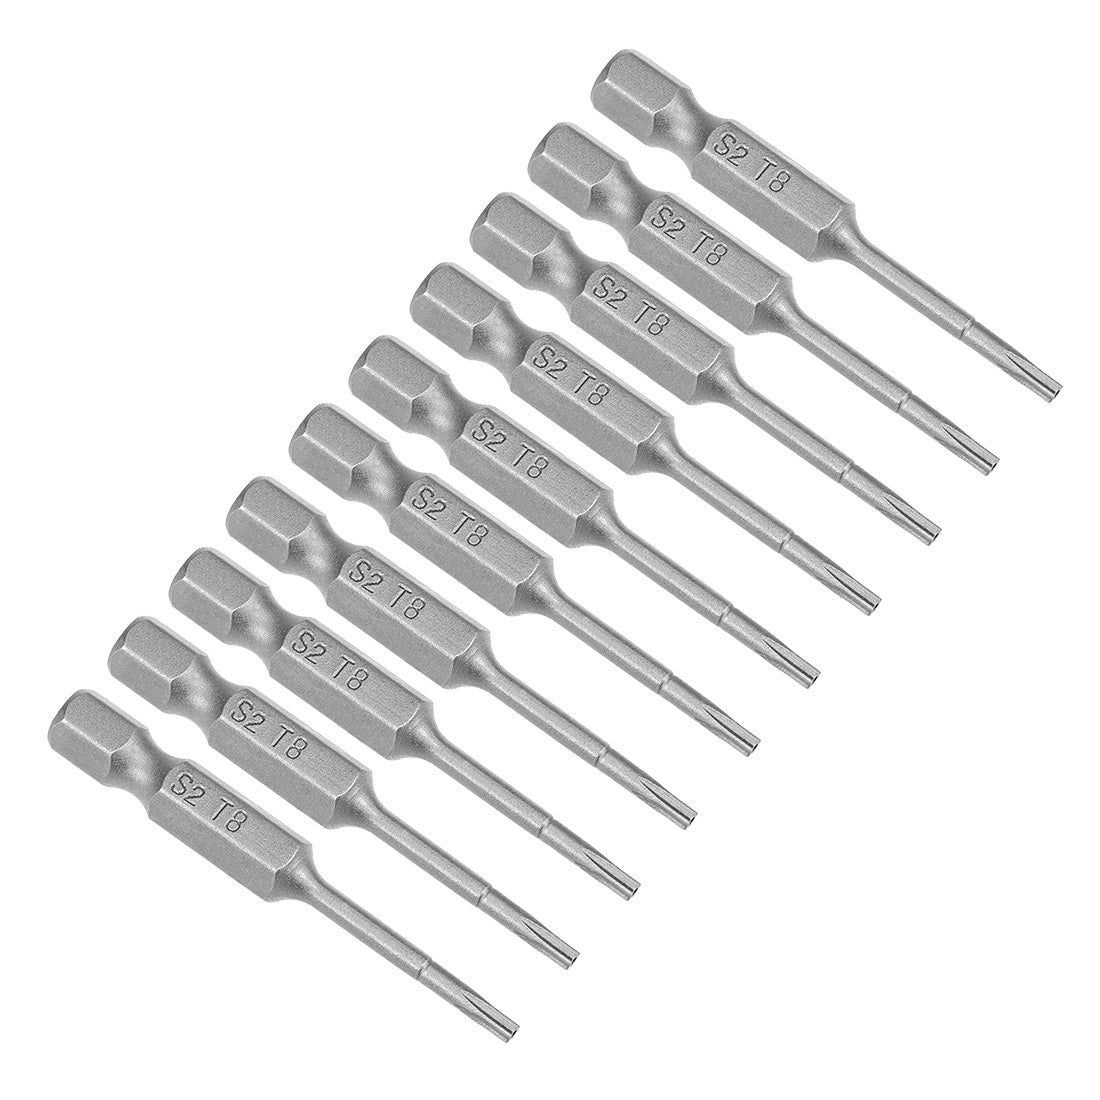 Uxcell Uxcell 10 Pcs Magnetic T27 Star 5 Point Screwdriver Bits, 1/4 Inch Hex Shank 2-inch Length S2 Security Screw Driver Kit Tools